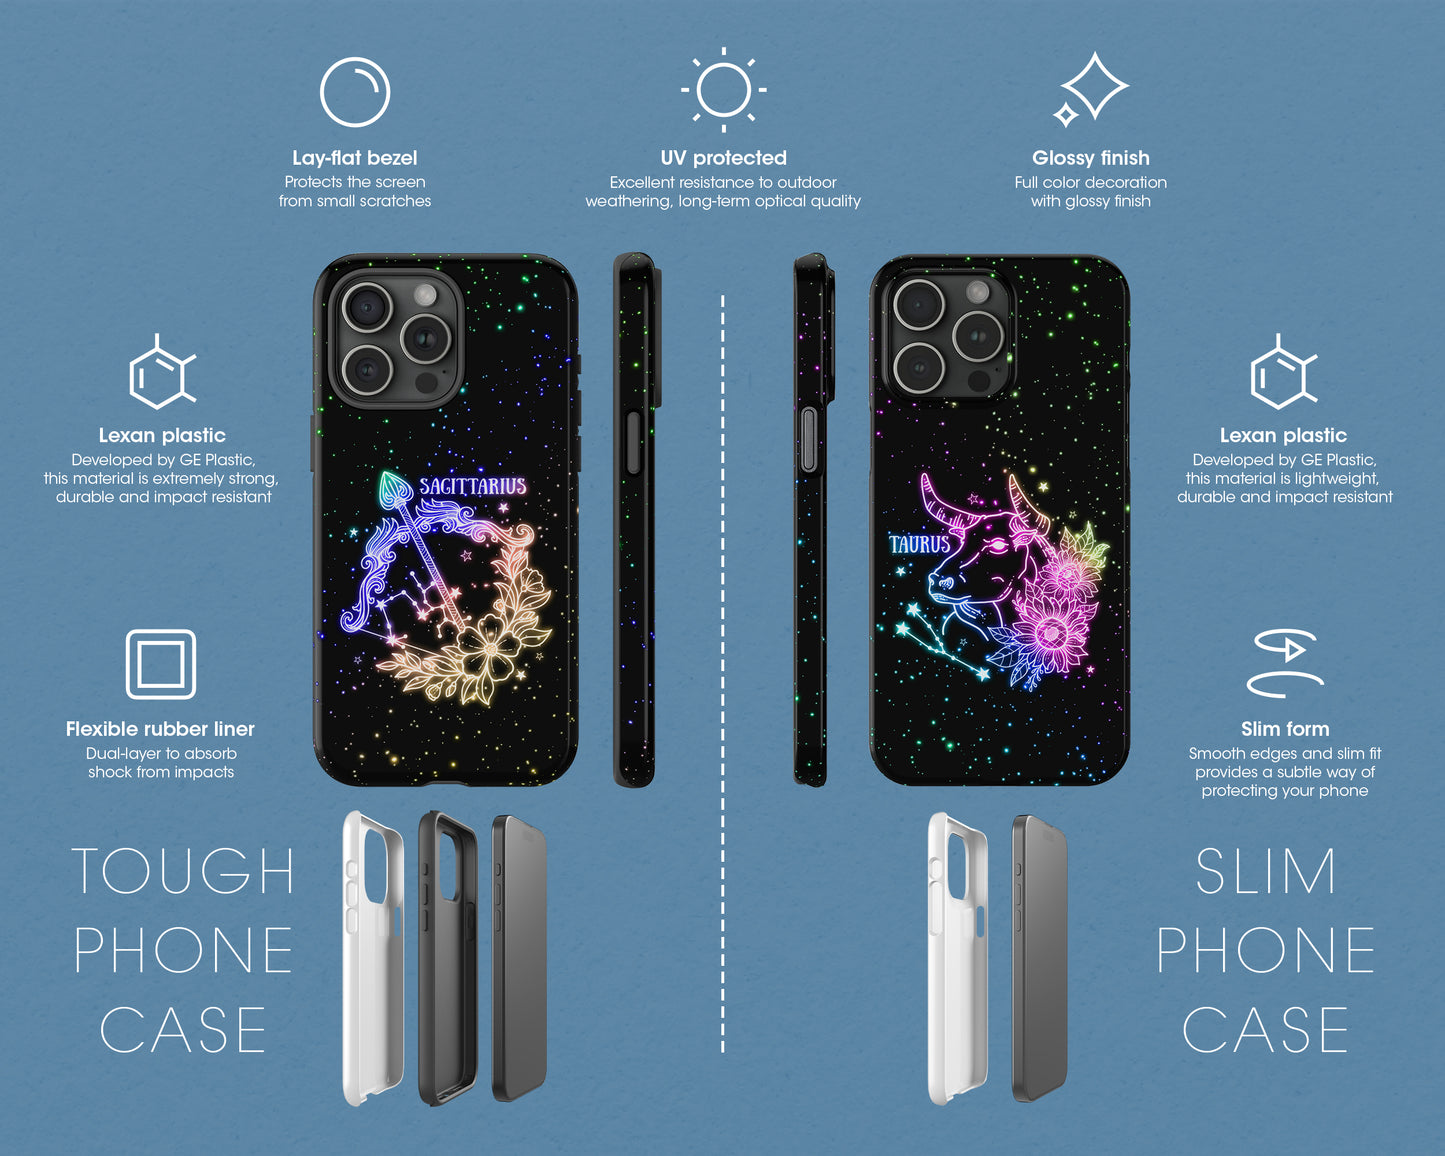 Zodiac sign glowing starry skies iPhone case